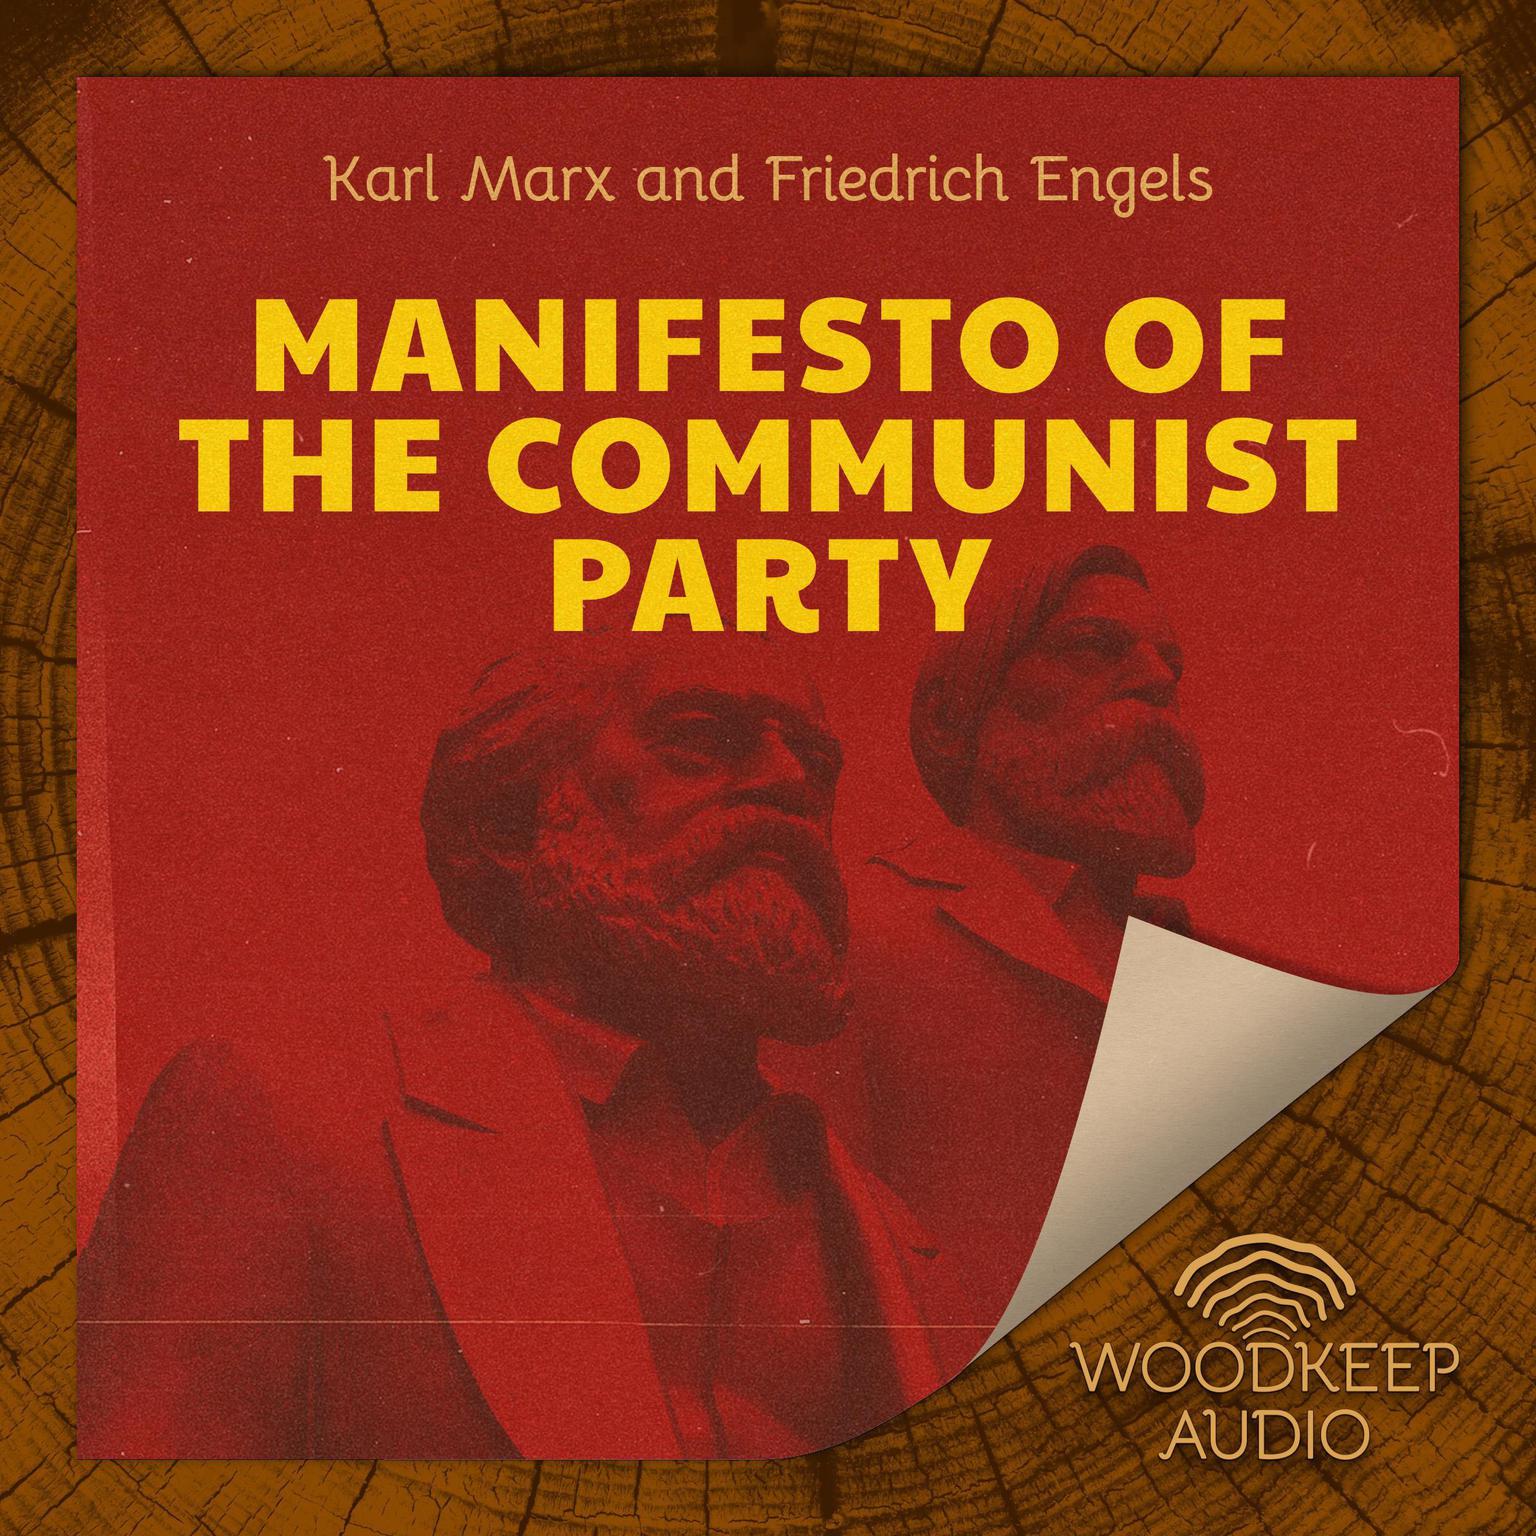 Manifesto of the Communist Party Audiobook, by Friedrich Engels